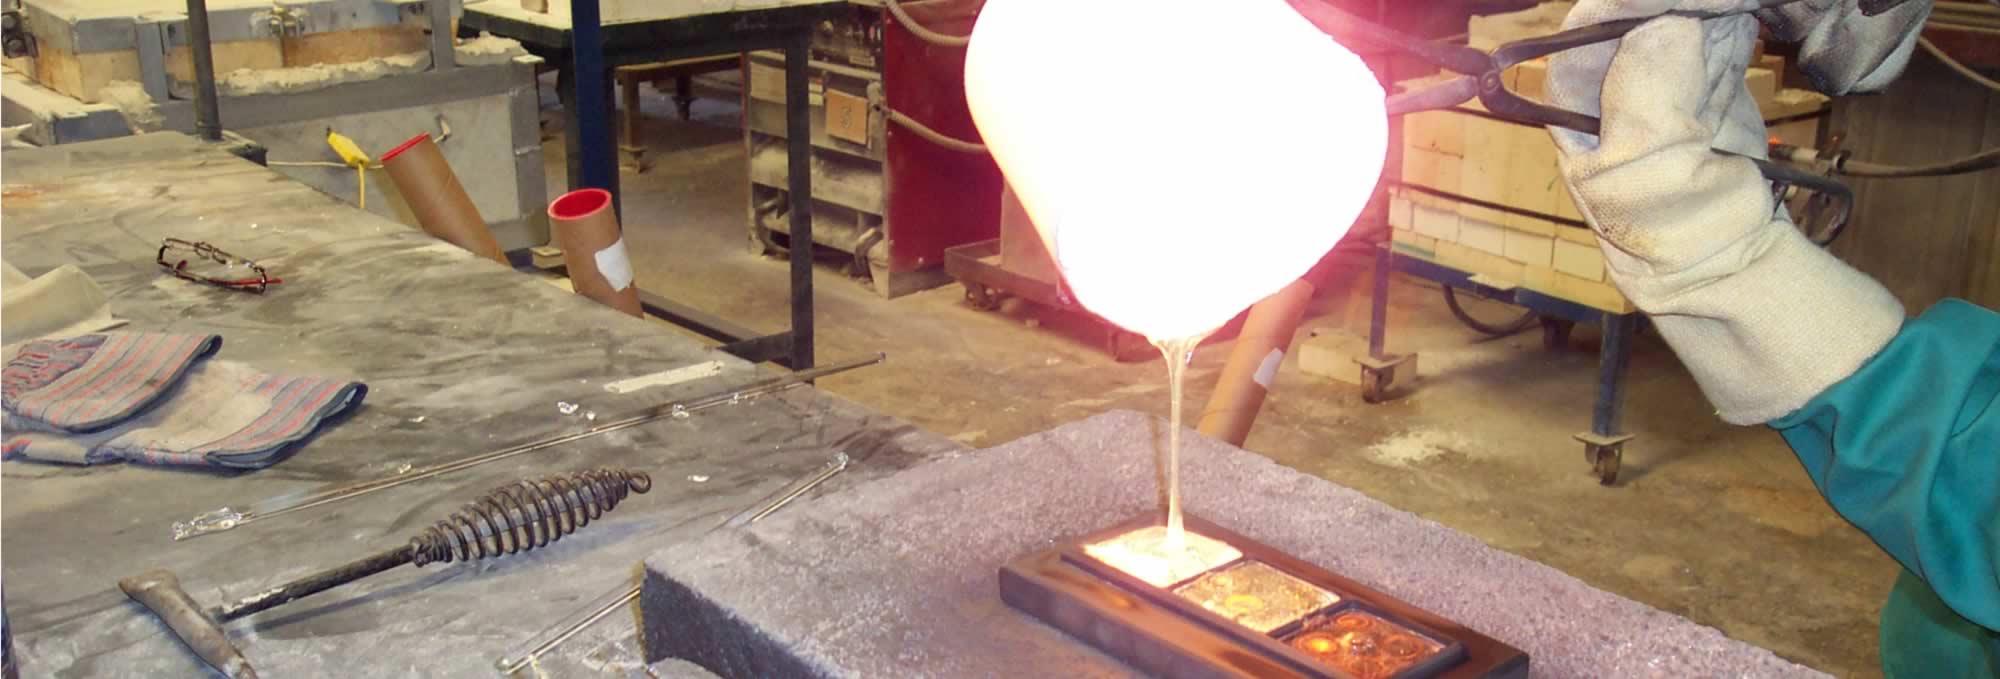 Glass Poured onto Plate